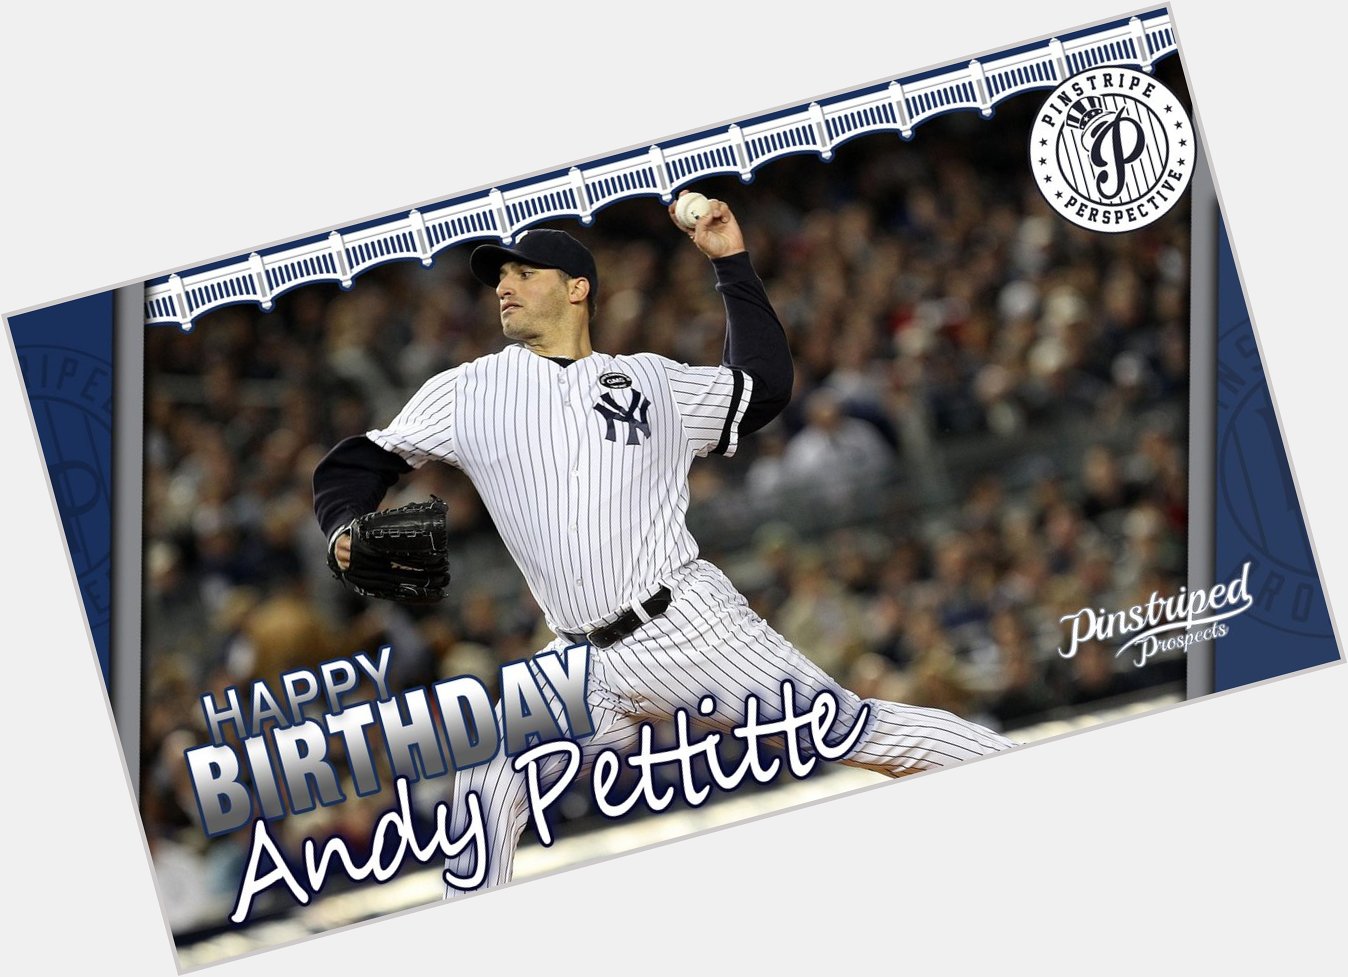 Happy Birthday to pitching legend, Andy Pettitte! 